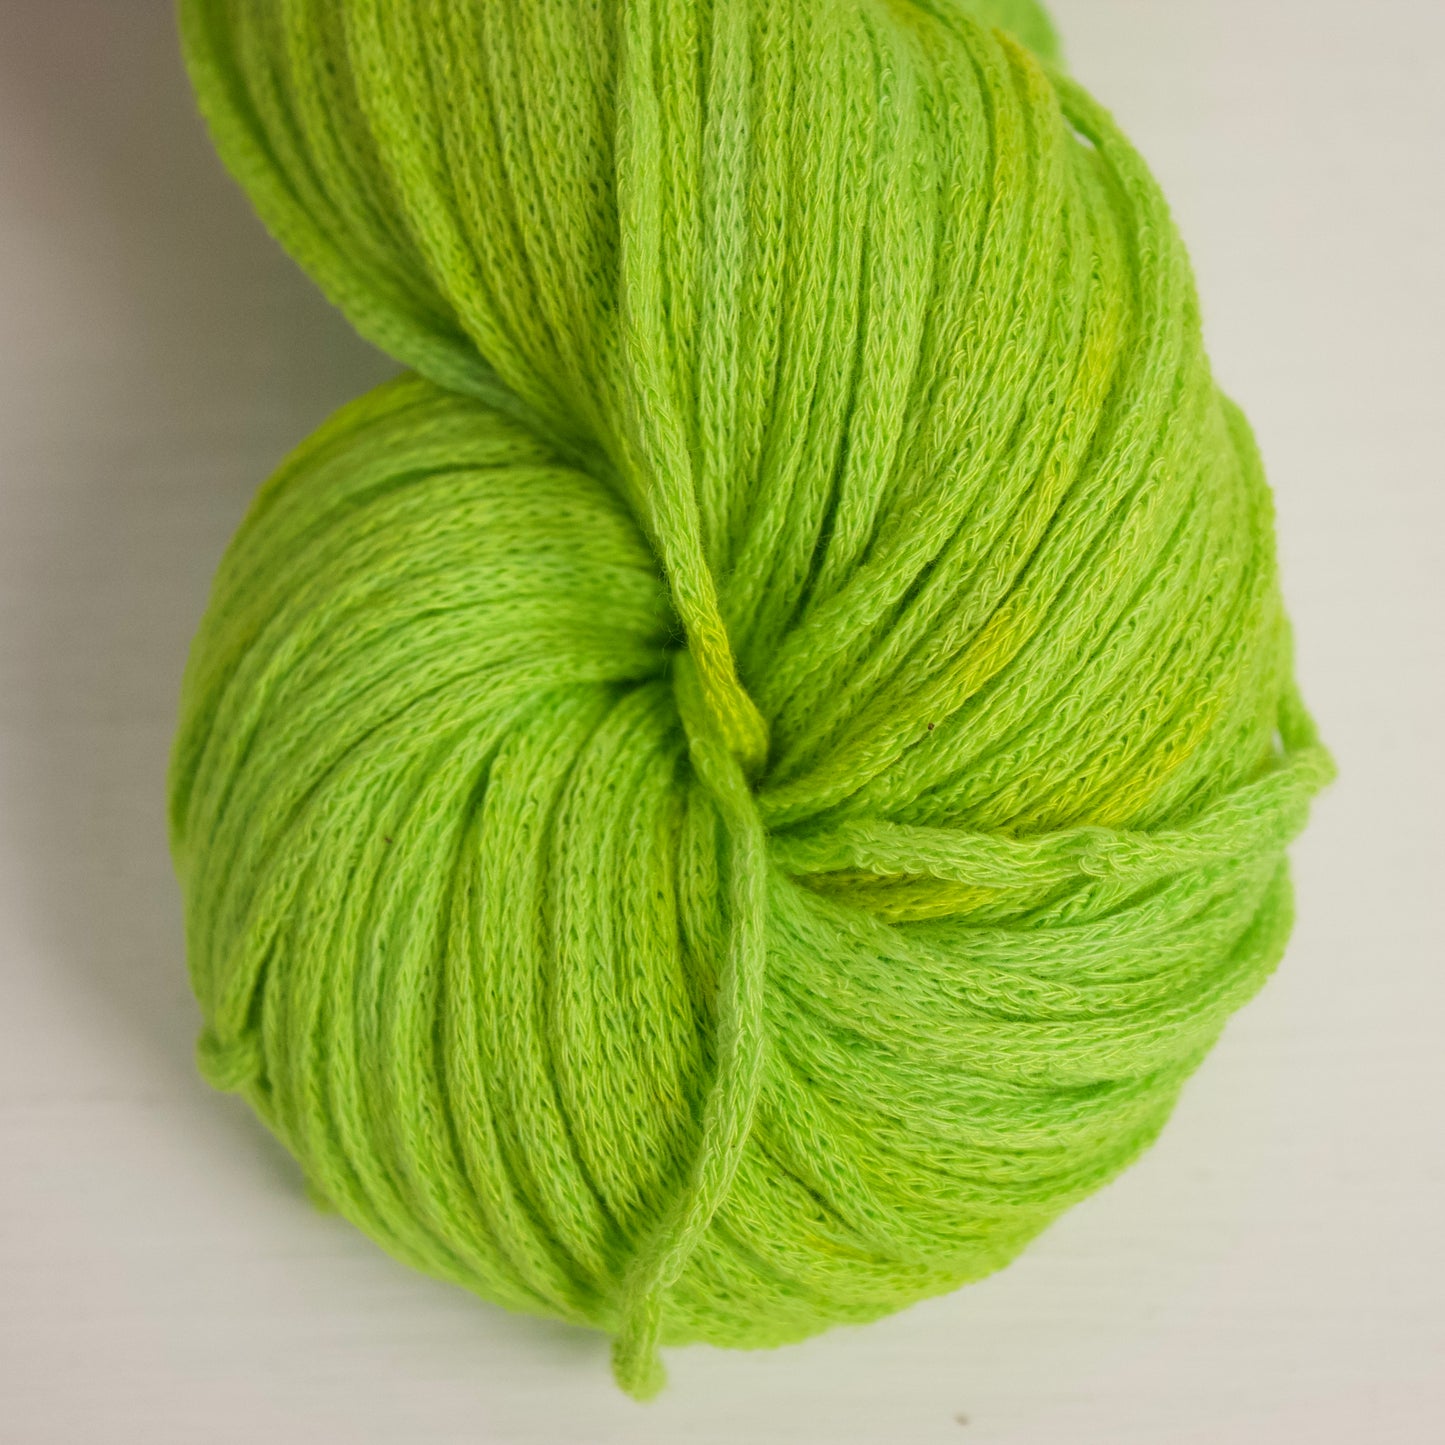 Intensely neon green yarn with highlights of brigt yellow. 